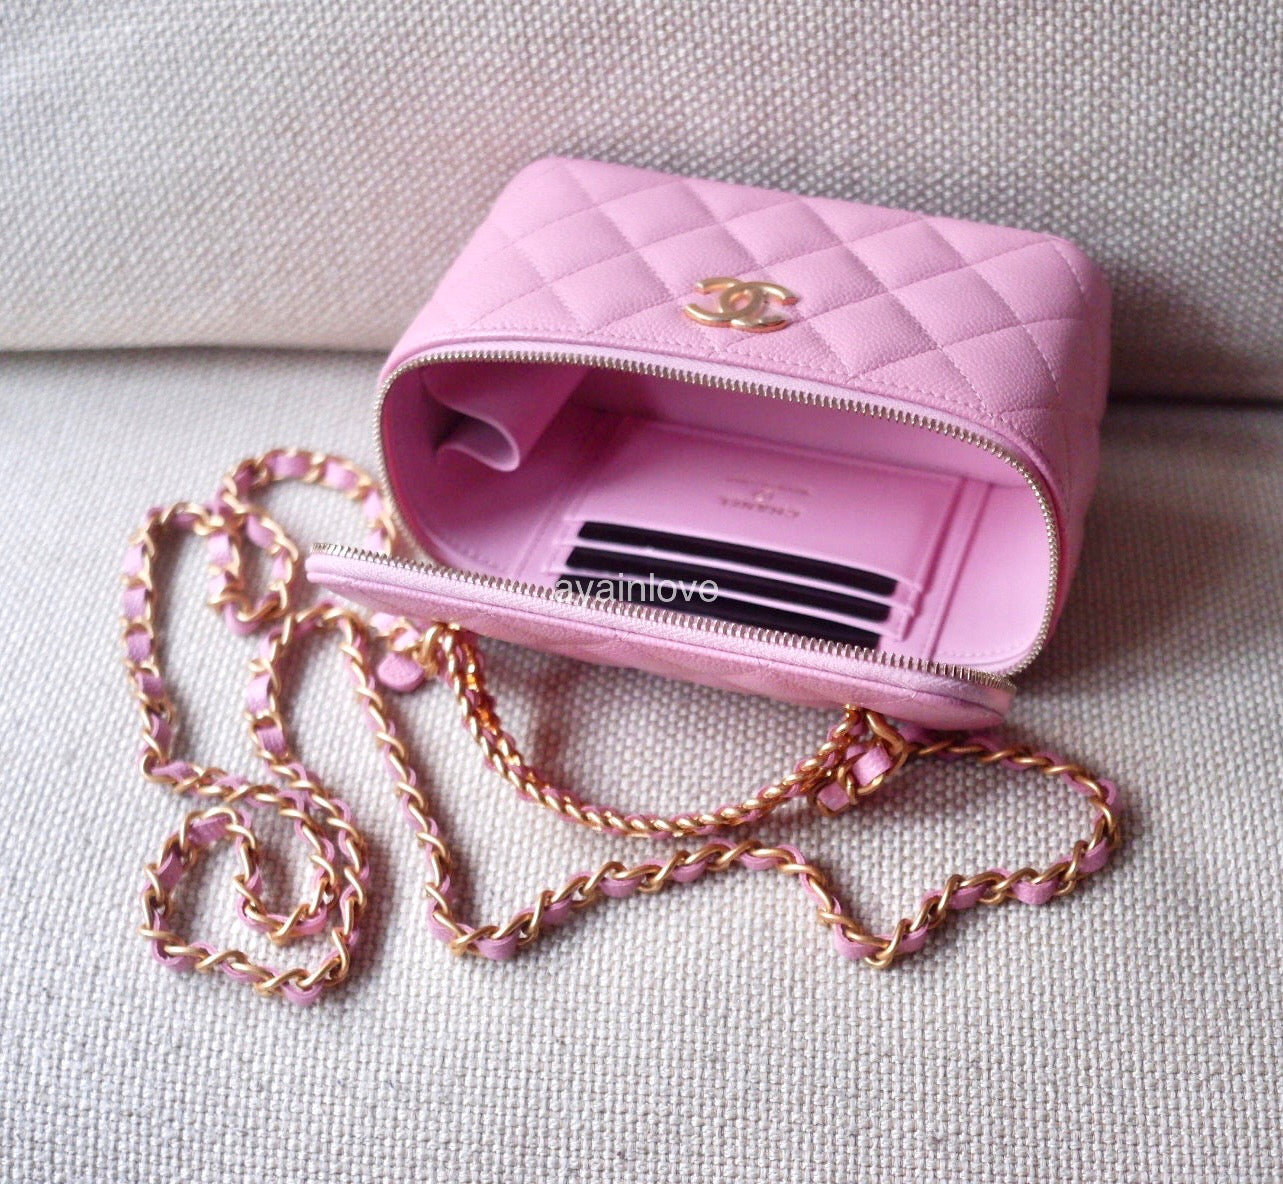 CHANEL 22S Pick Me Up Pink Caviar Top Handle Vanity Brushed Gold Hardware